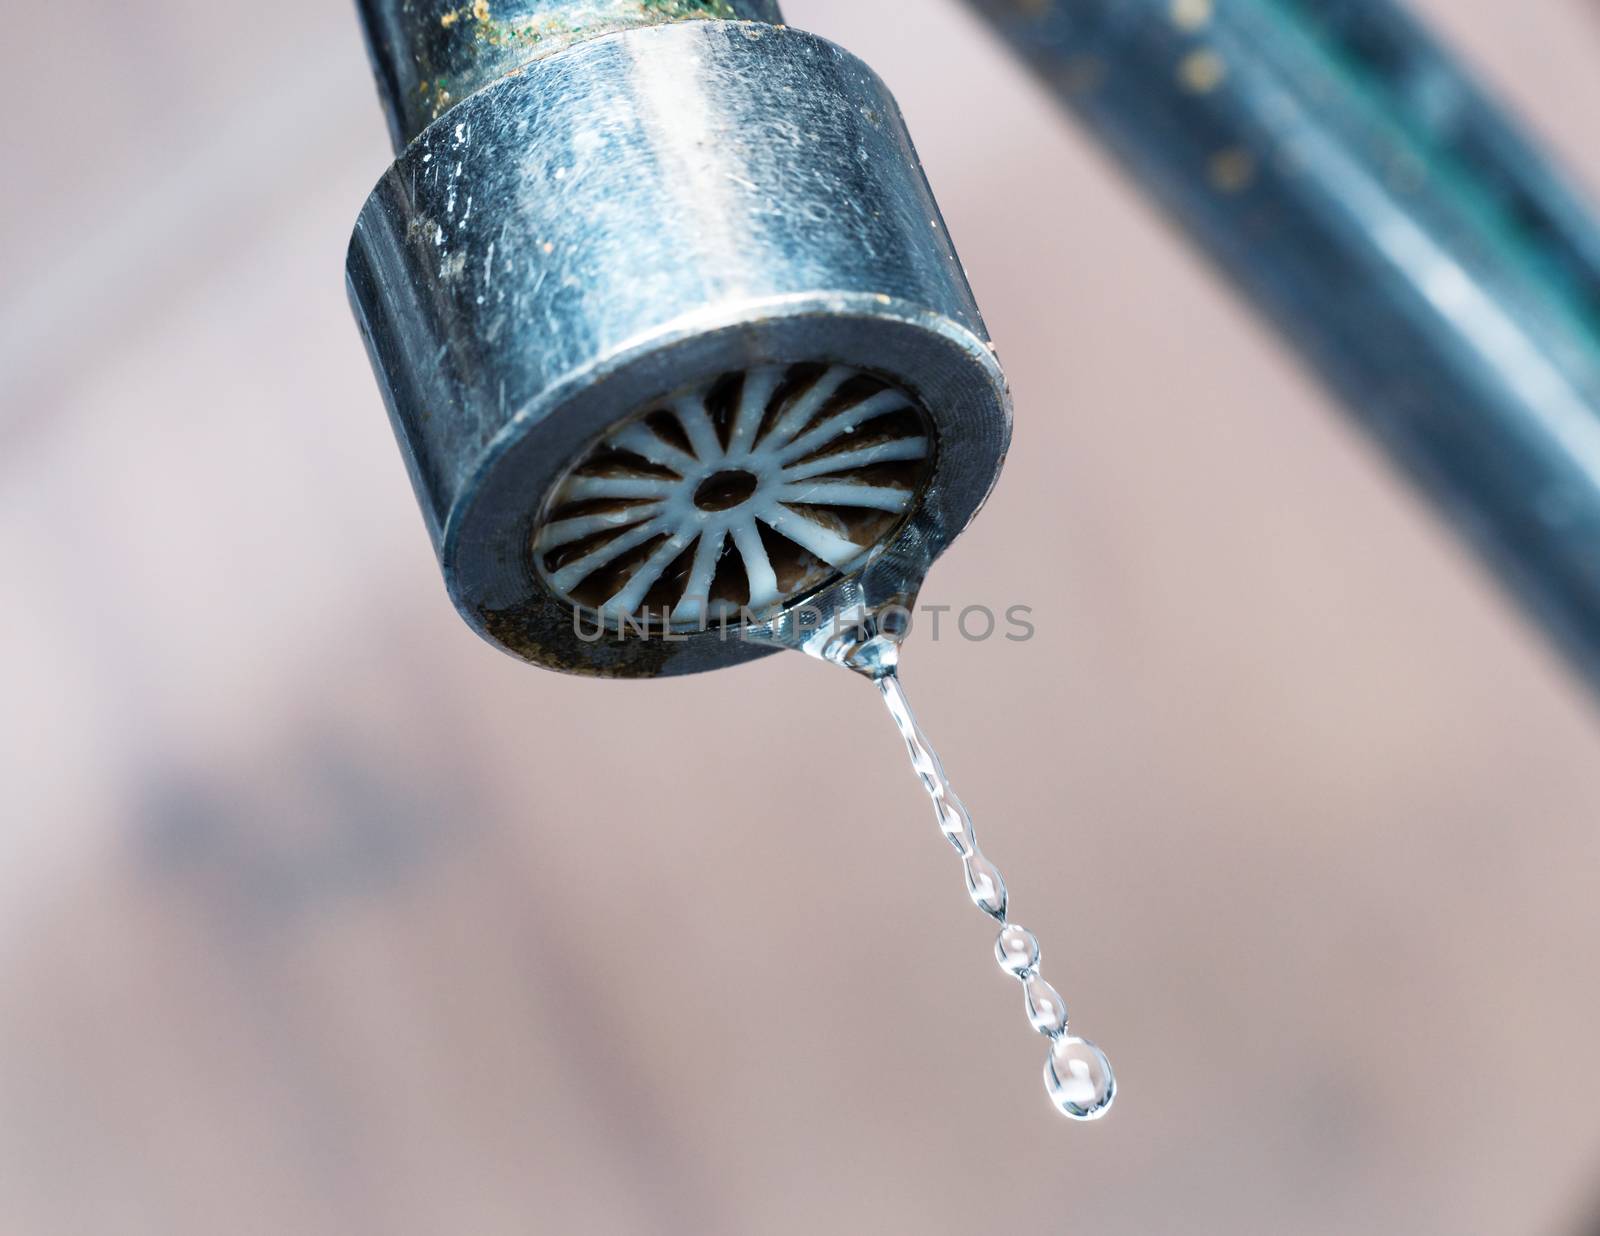 Macro shot of an old kitchen tap dripping, wasting water concept